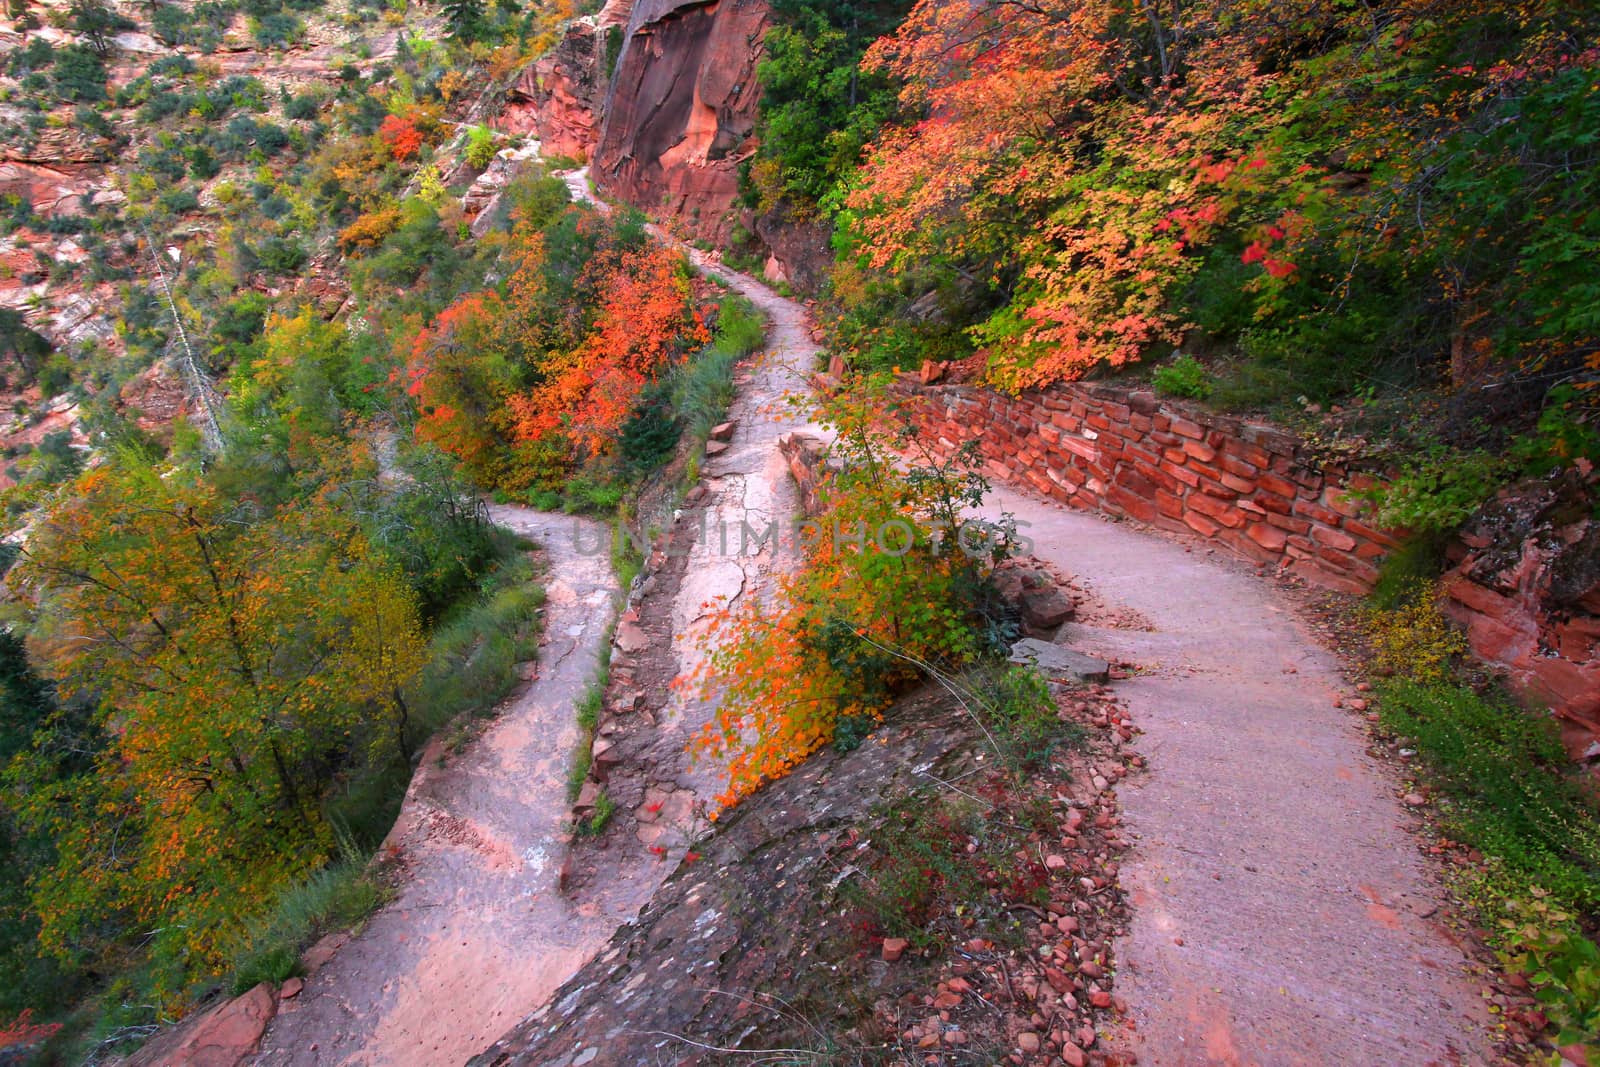 The Hidden Canyon Trail of Zion National Park is a series of exposed switchbacks winding high above Zion Canyon.